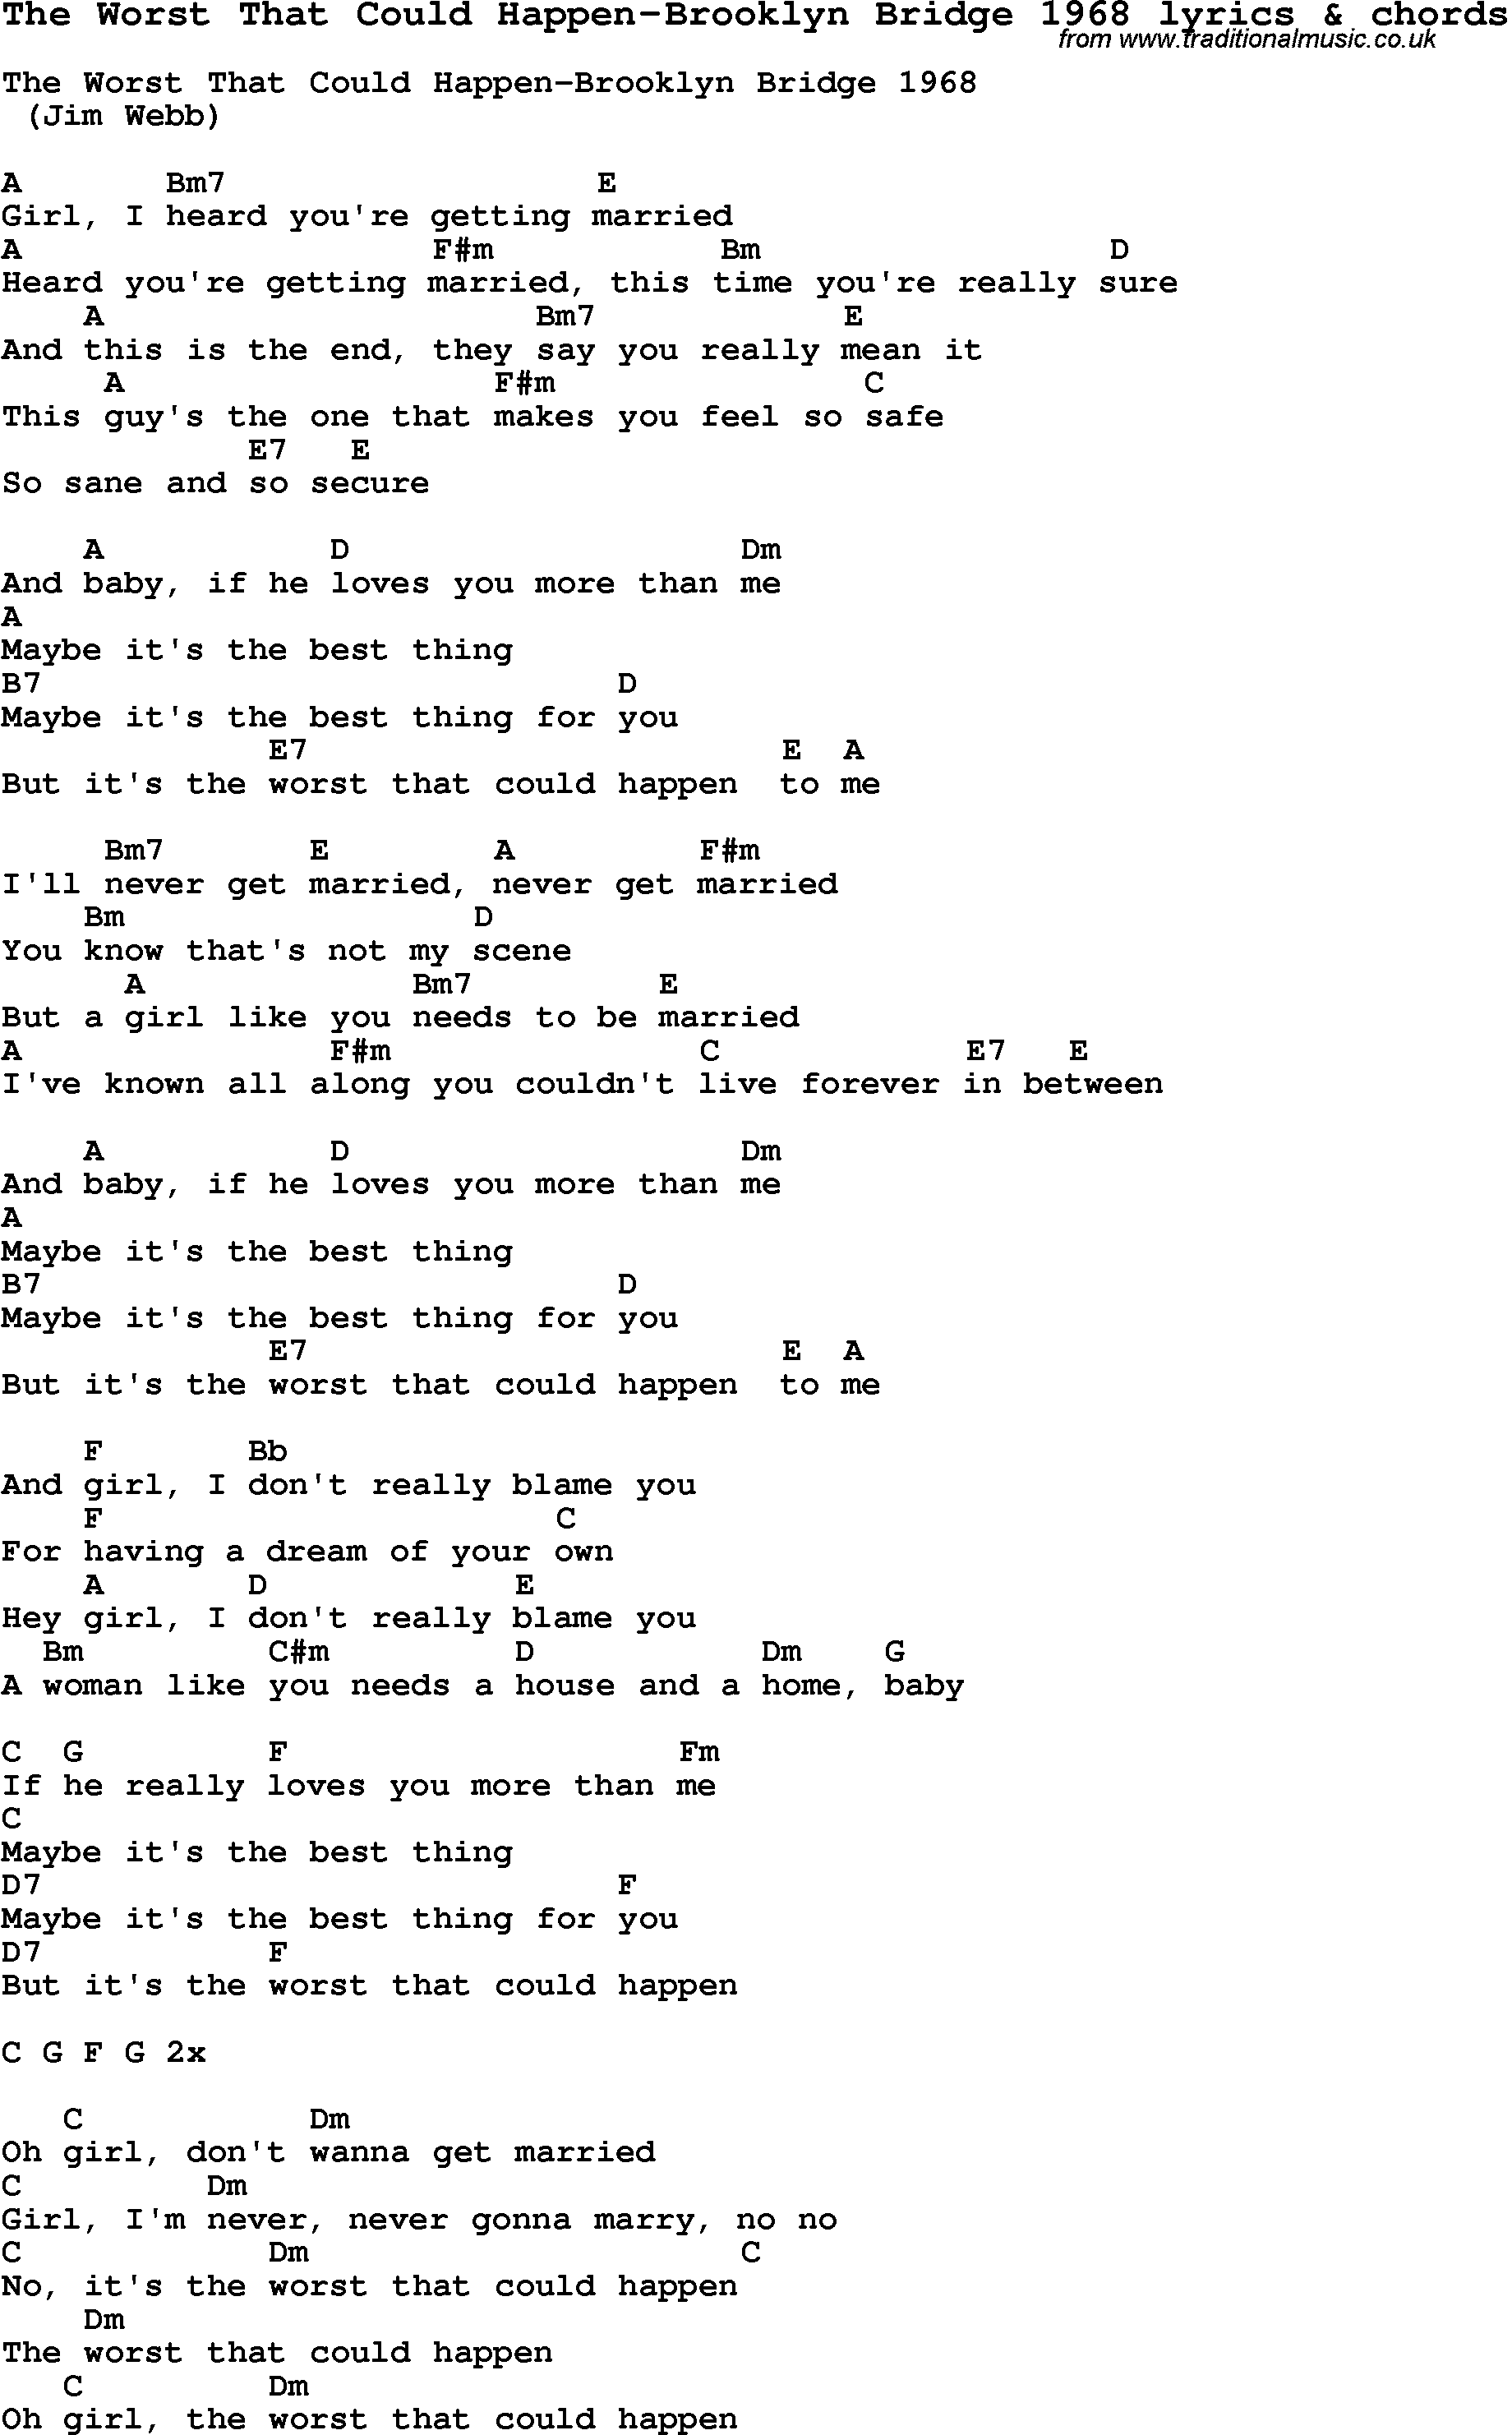 Love Song Lyrics for: The Worst That Could Happen-Brooklyn Bridge 1968 with chords for Ukulele, Guitar Banjo etc.